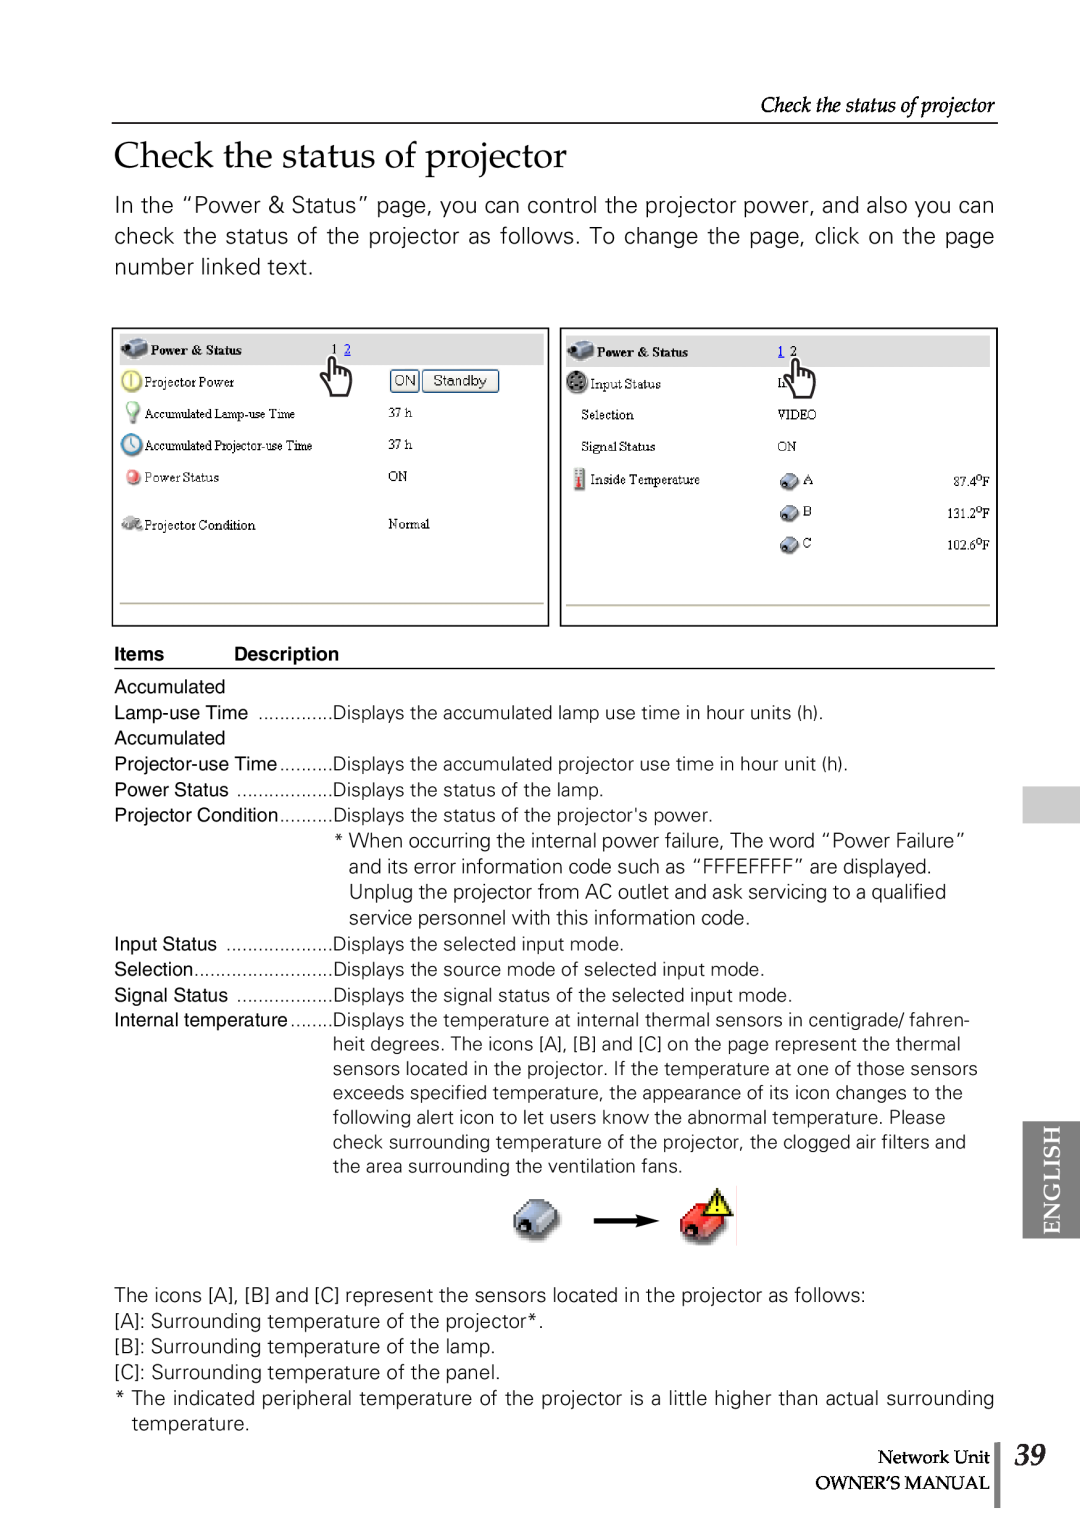 Sanyo POA-PN02 owner manual Check the status of projector, English 